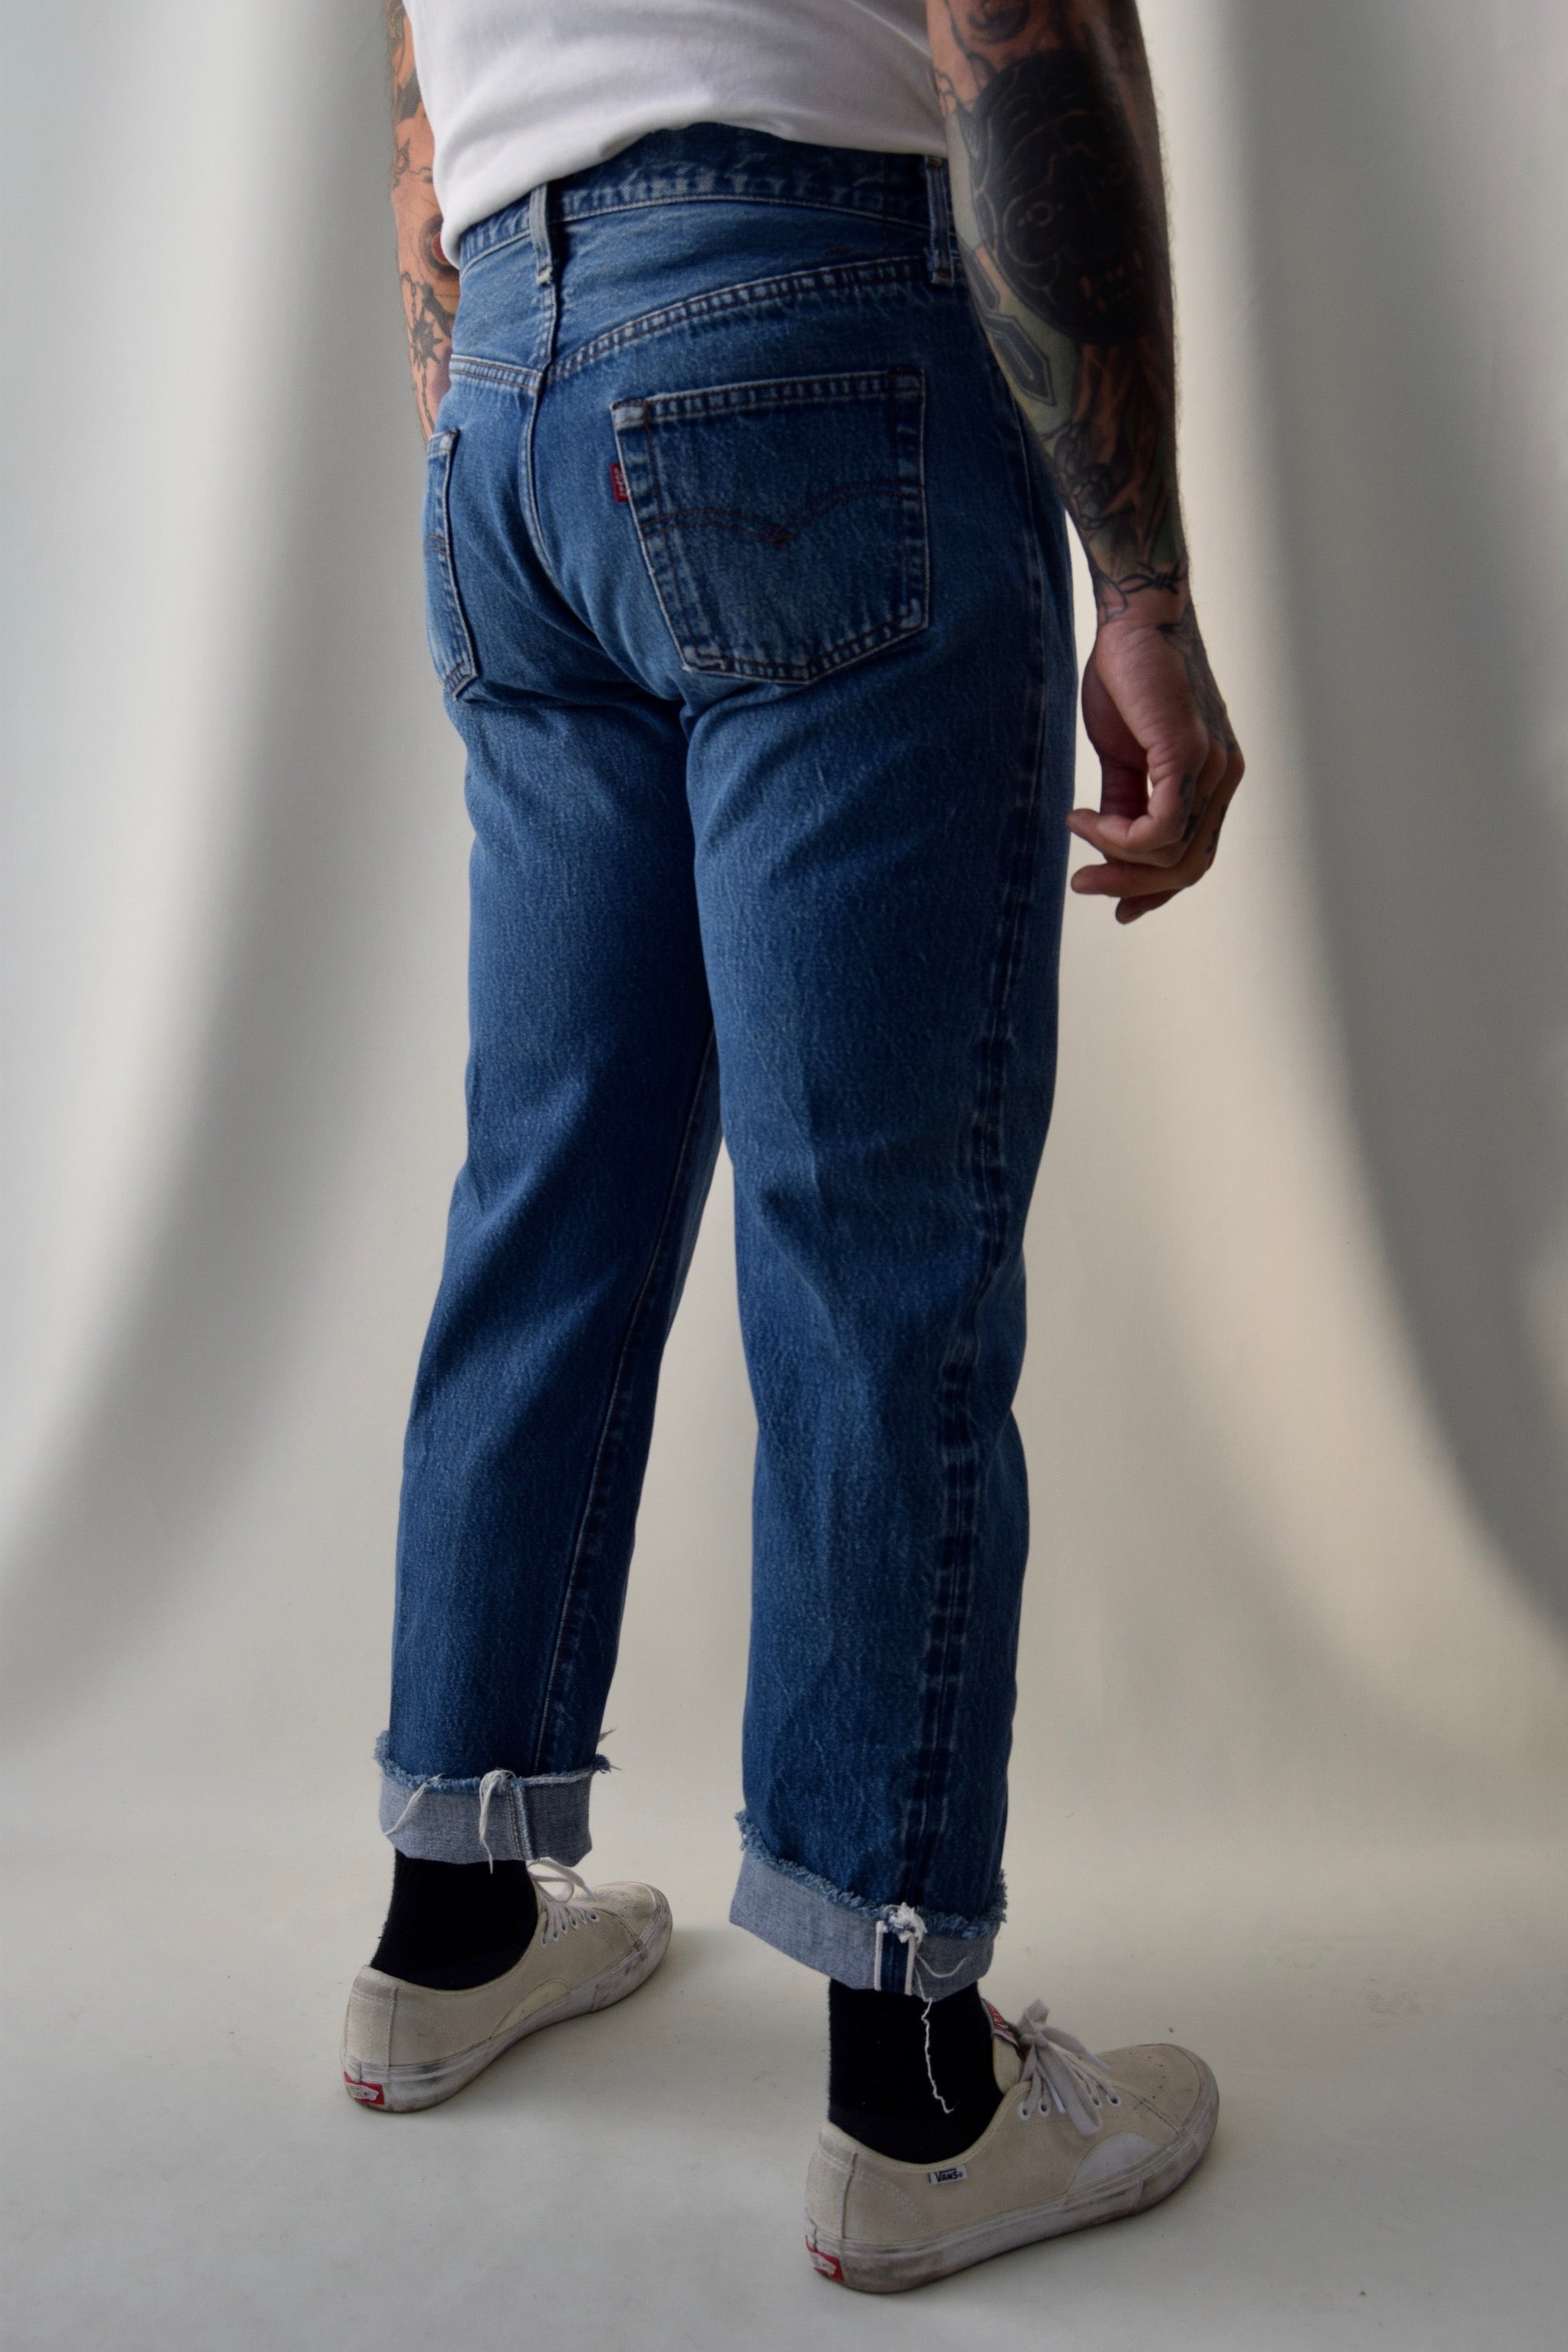 1980's Levis Medium Wash Selvedge Jeans – Thrift and Vintage